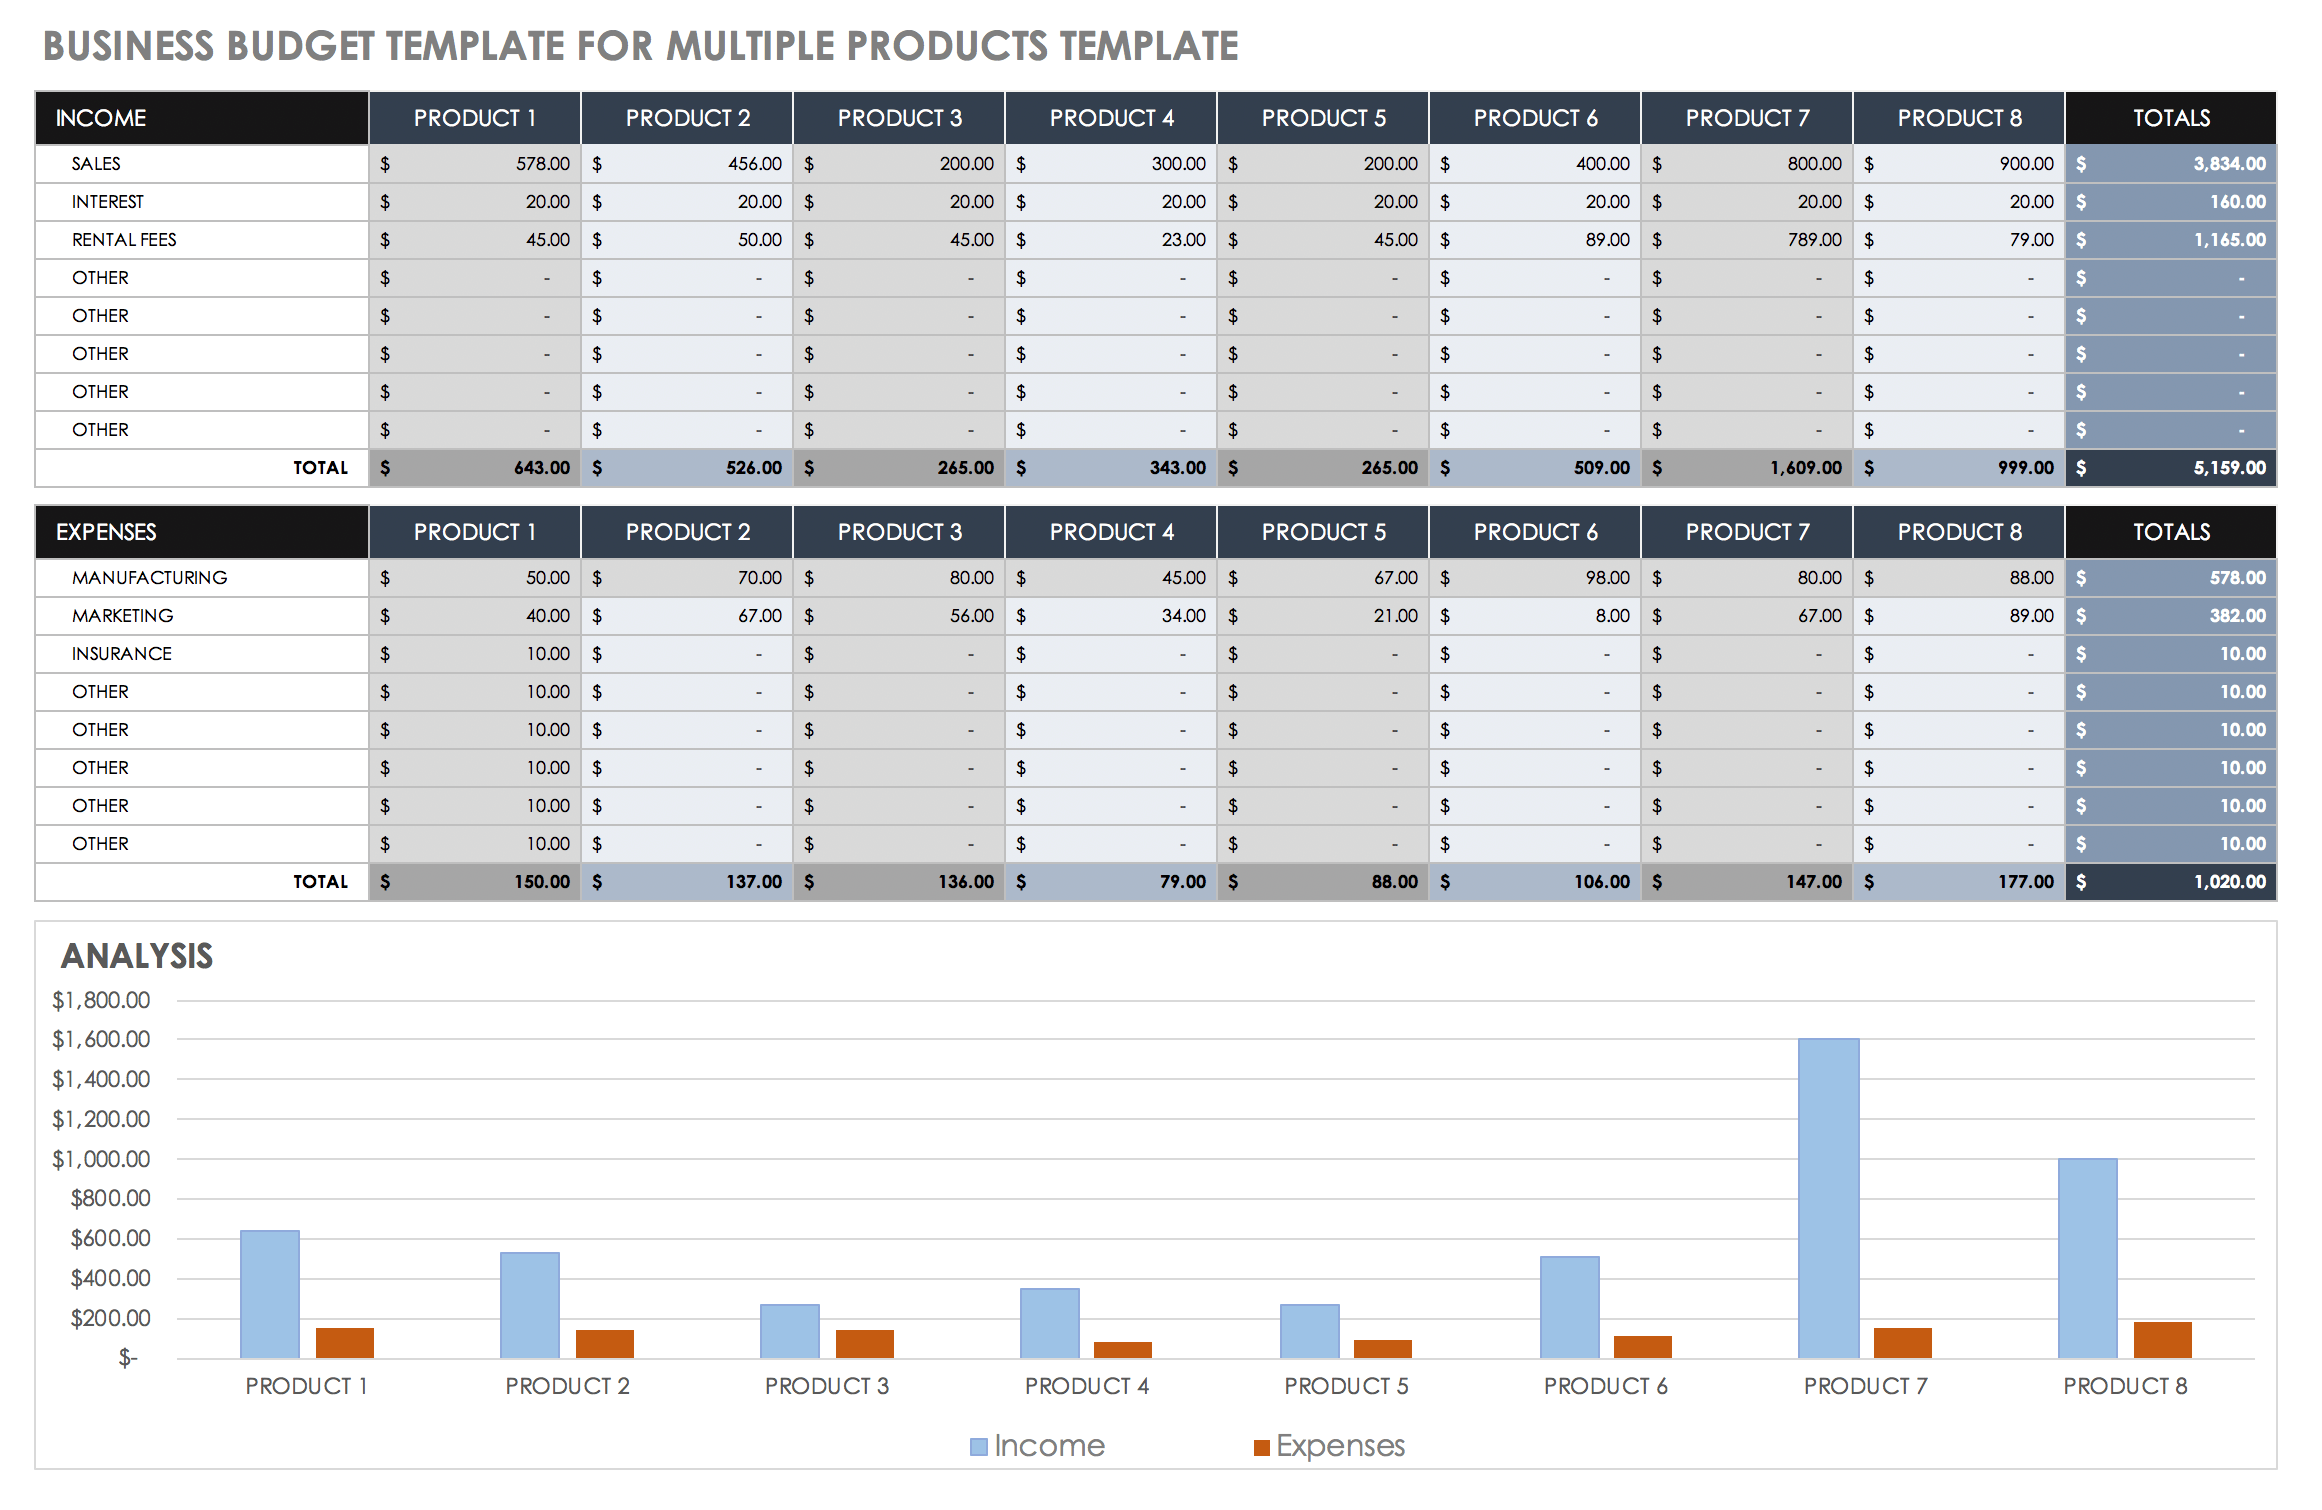 Business Budget Template for Multiple Products Template